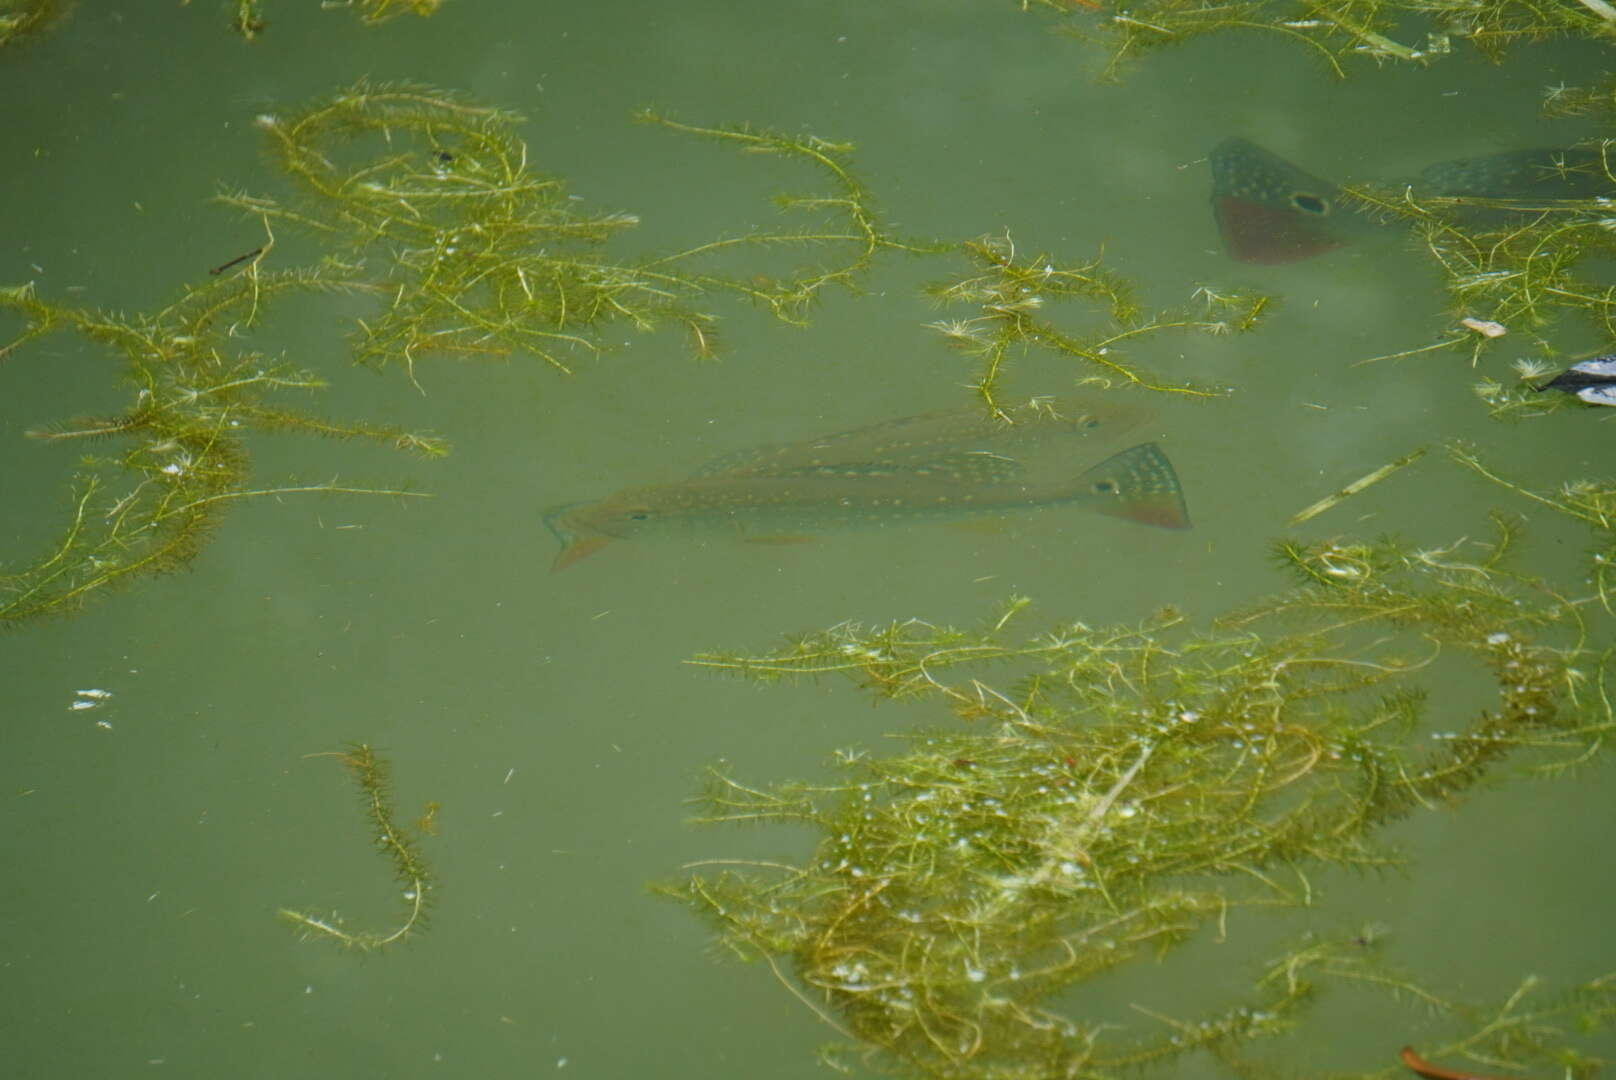 Image of Speckled peacock bass